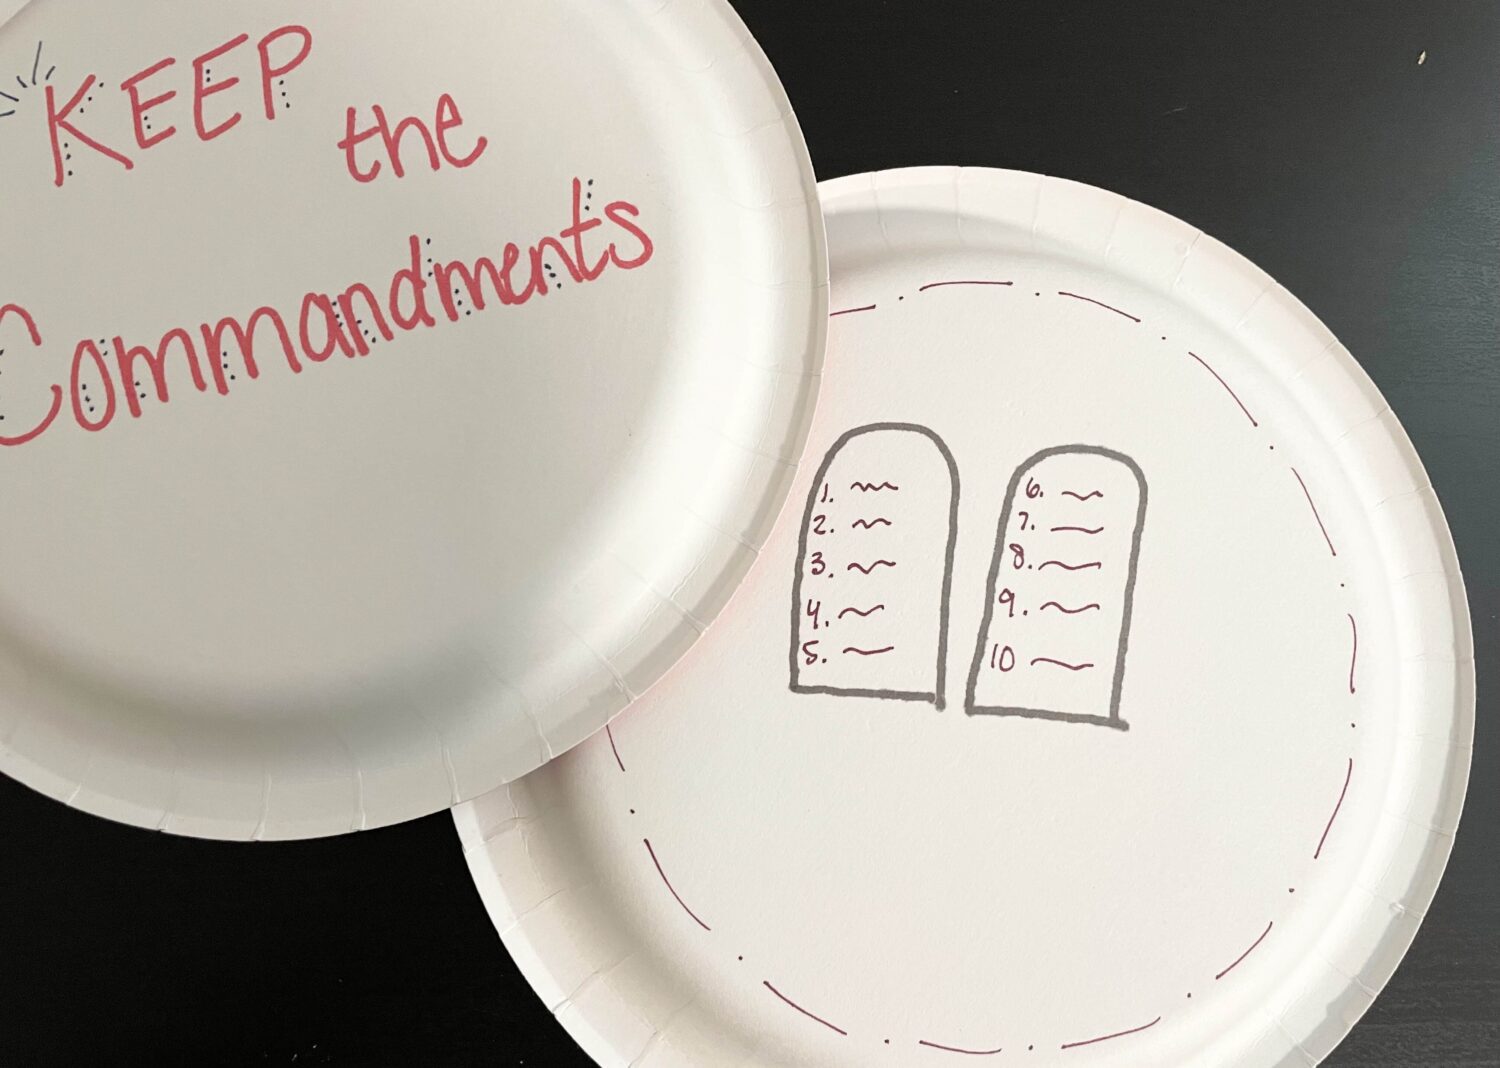 Keep the Commandments paper plates fun rhythm pattern to make music with plates as your instruments! Singing time ideas for LDS Primary music leaders with song helps